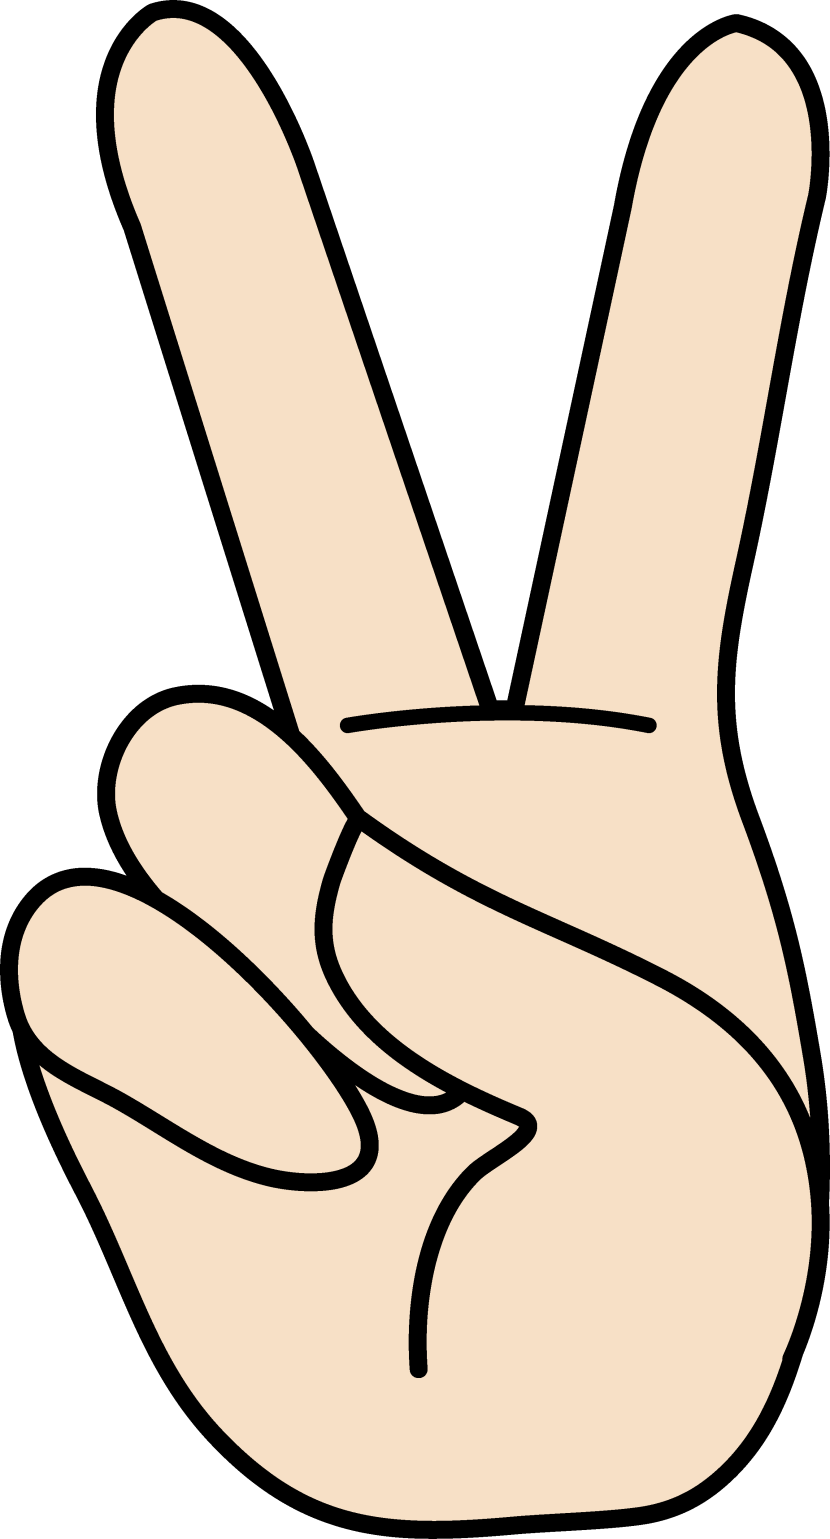 Peace clipart #4, Download drawings